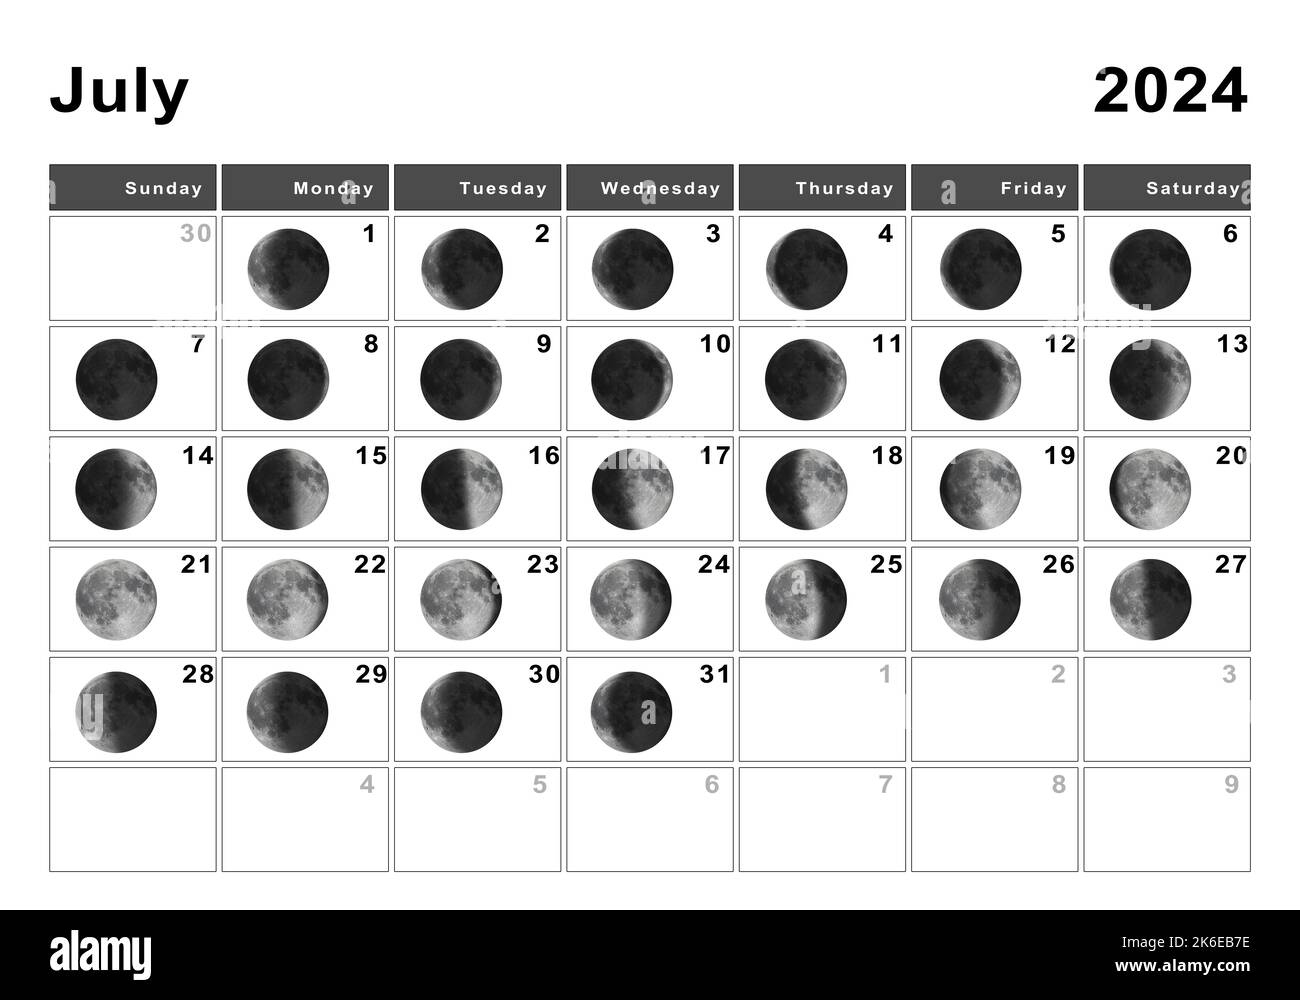 July Full Moon Cut Out Stock Images &Amp;Amp;Amp; Pictures - Alamy | Full Moon Calendar For July 2024